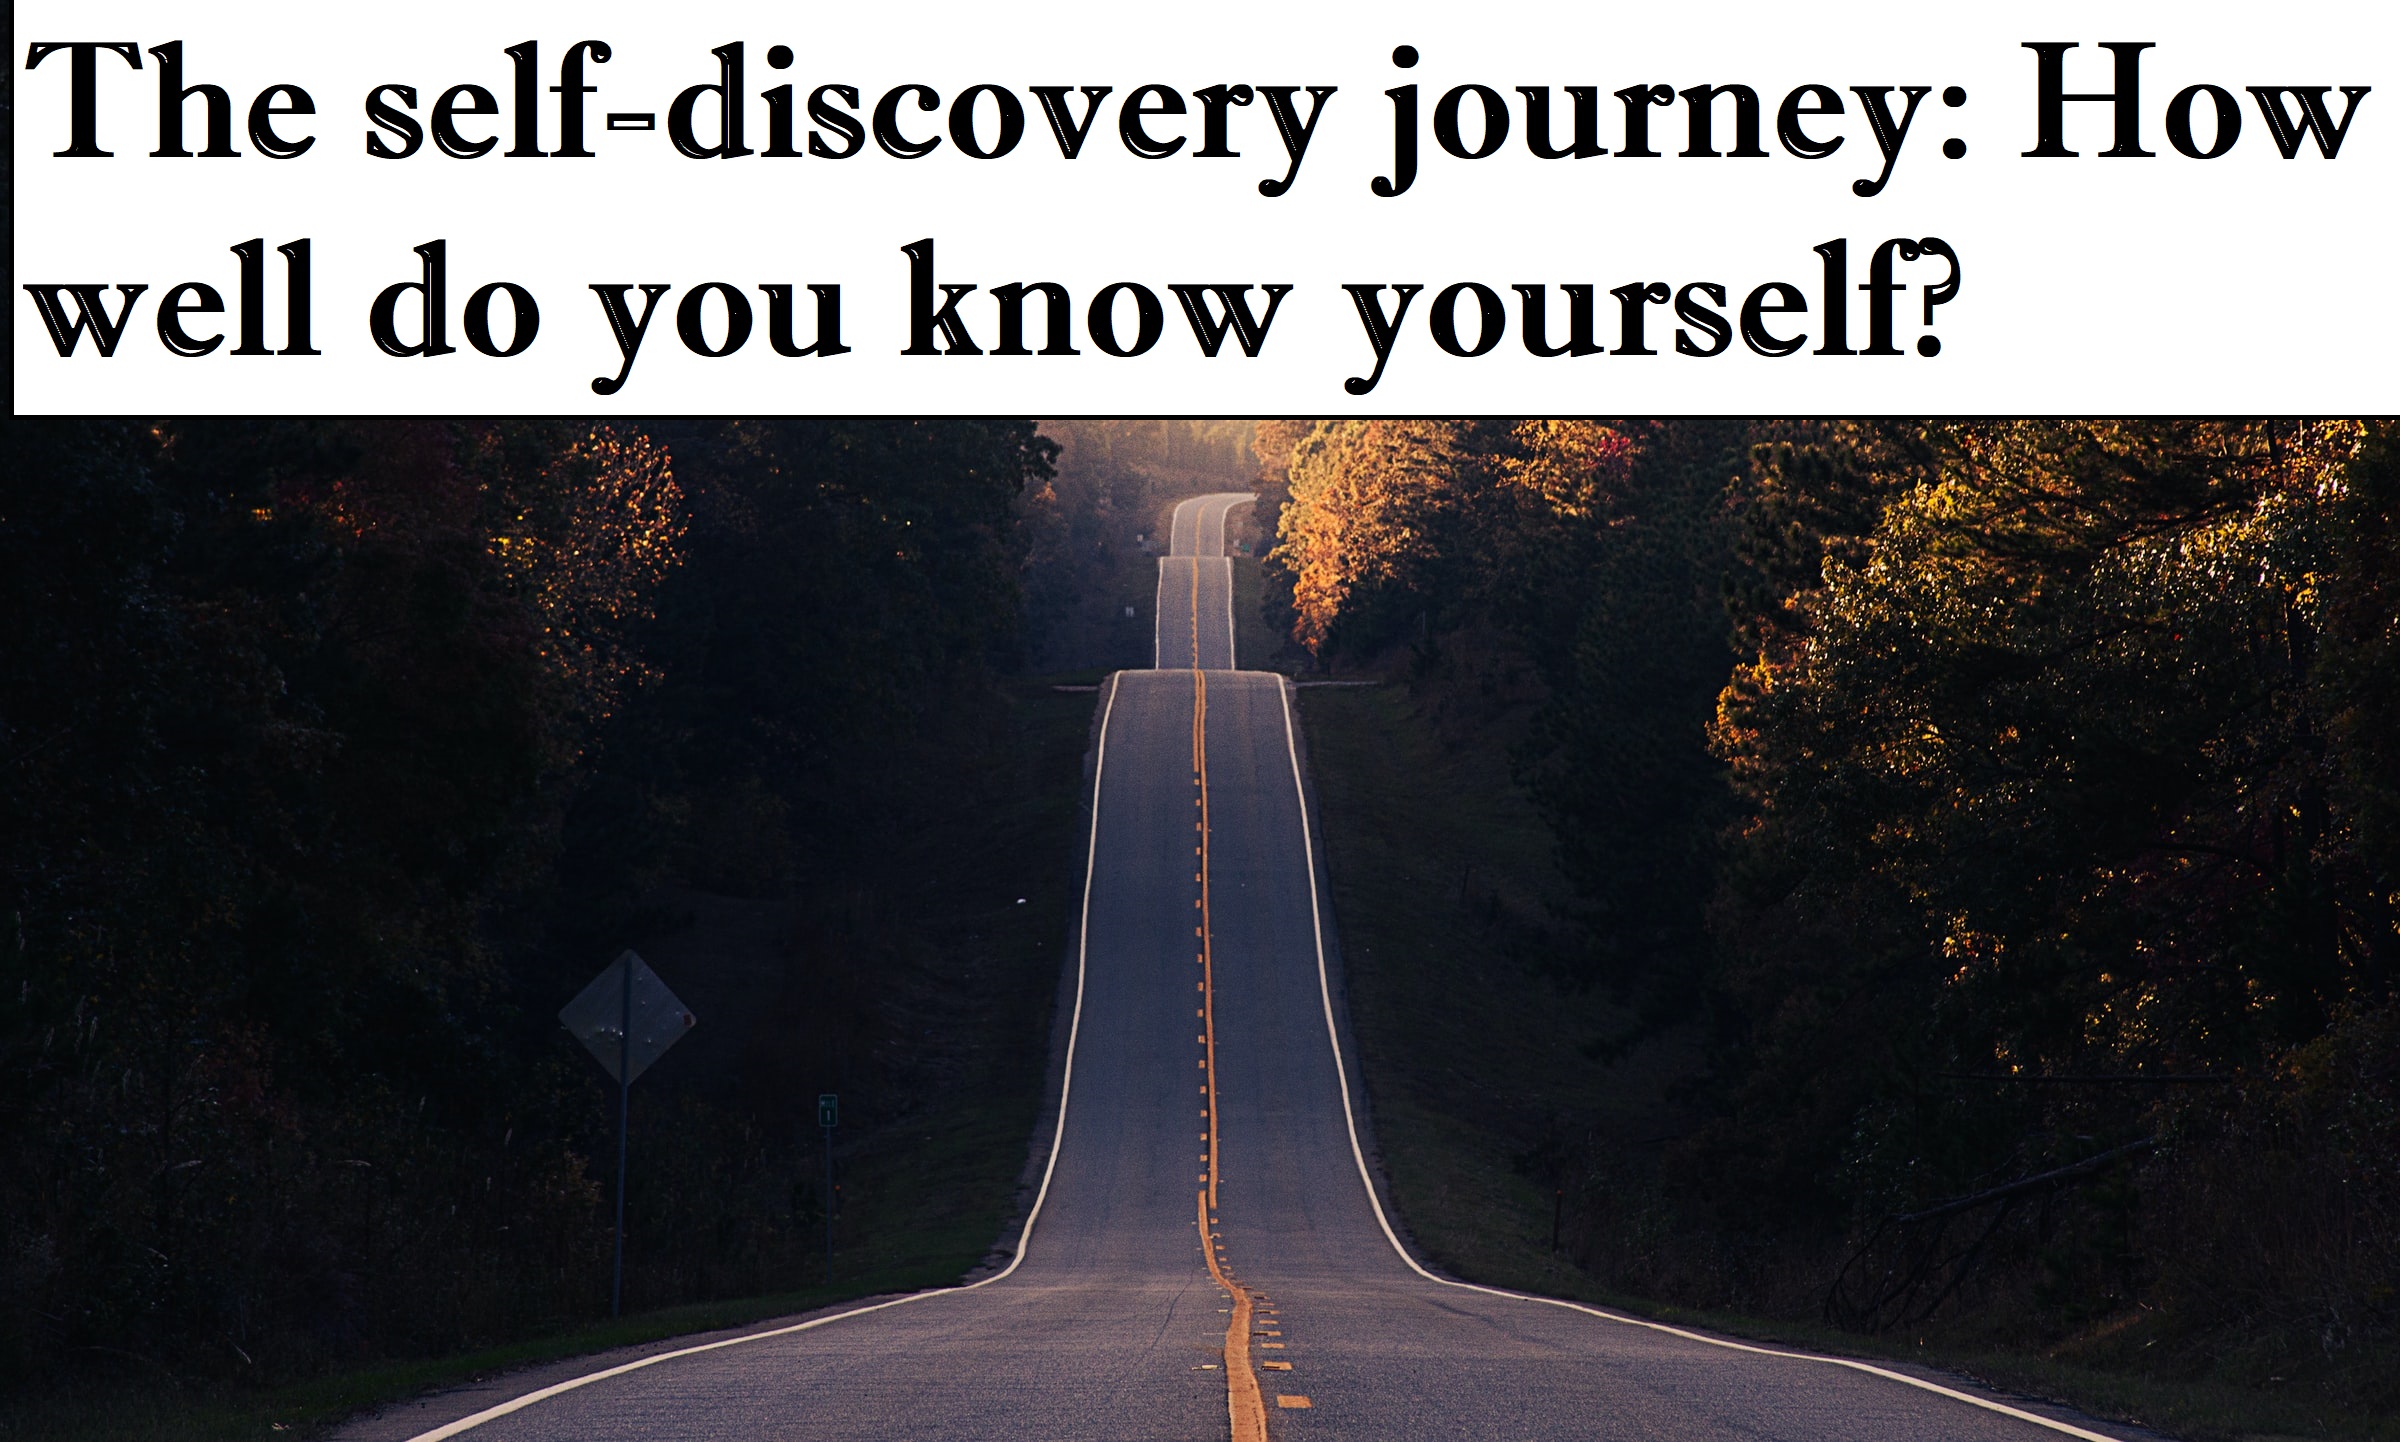 the self-discovery journey